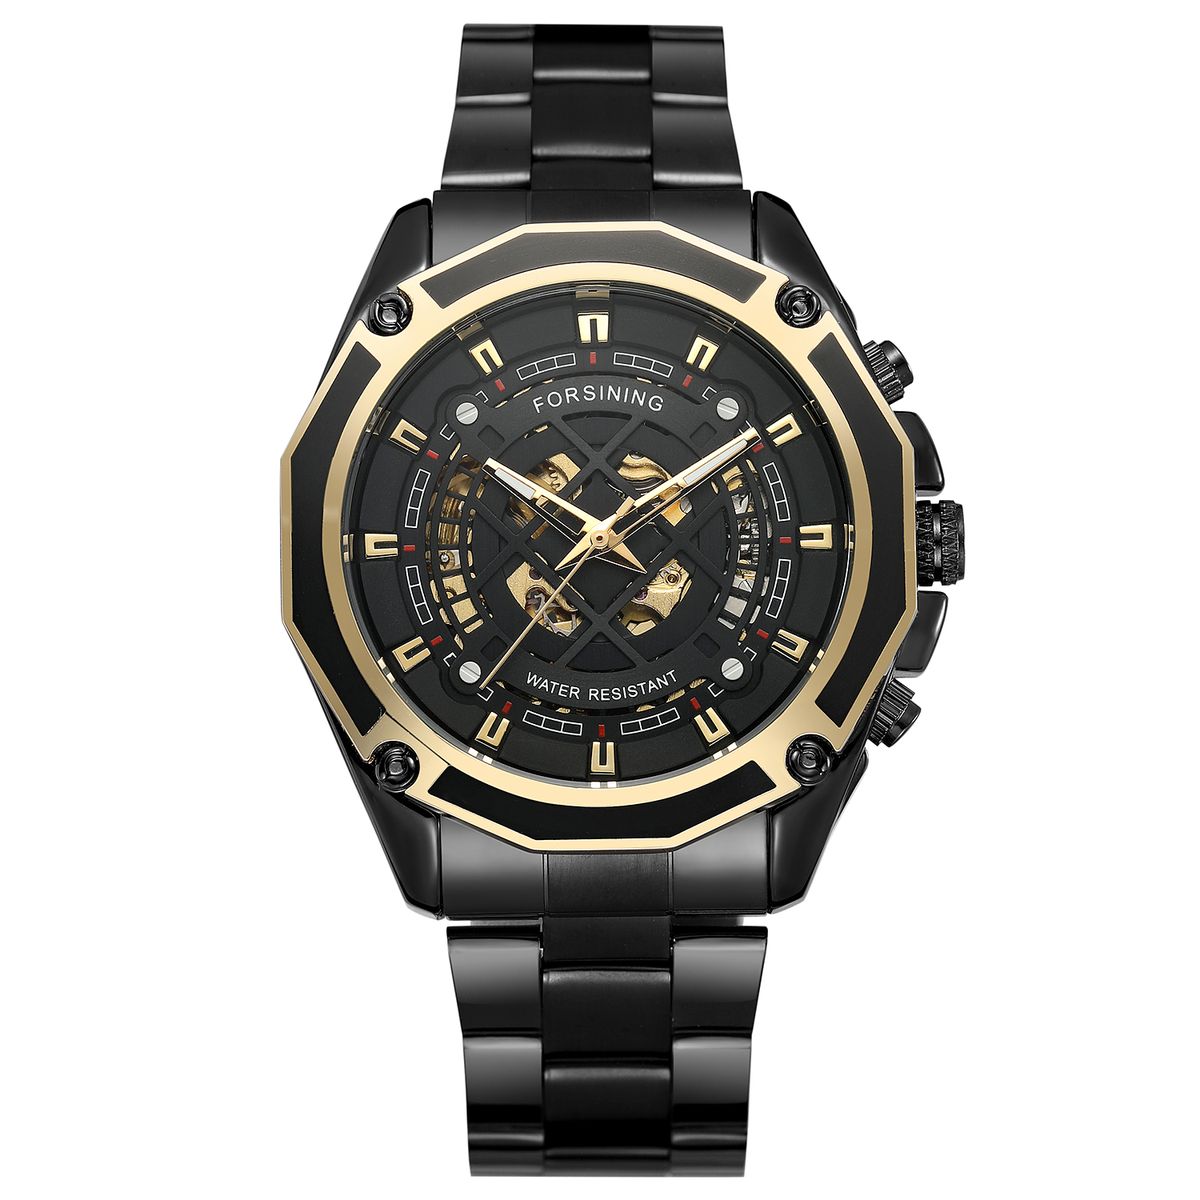 Forsining Omero Automatic Mens Watch -Black/Gold | Shop Today. Get it ...